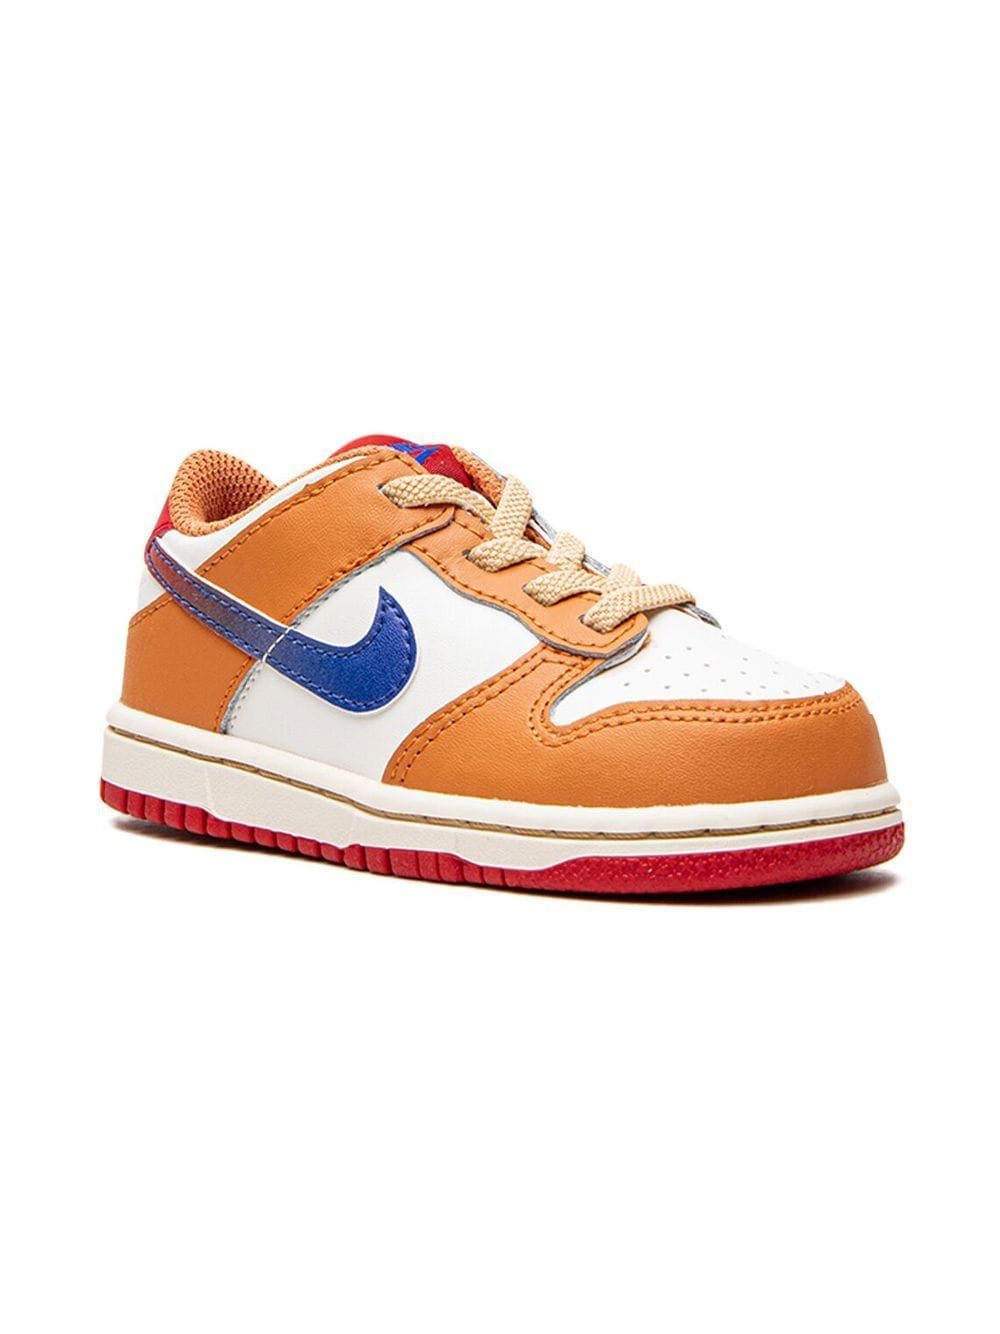 Image 1 of Nike Kids Dunk Low "Hot Curry" sneakers